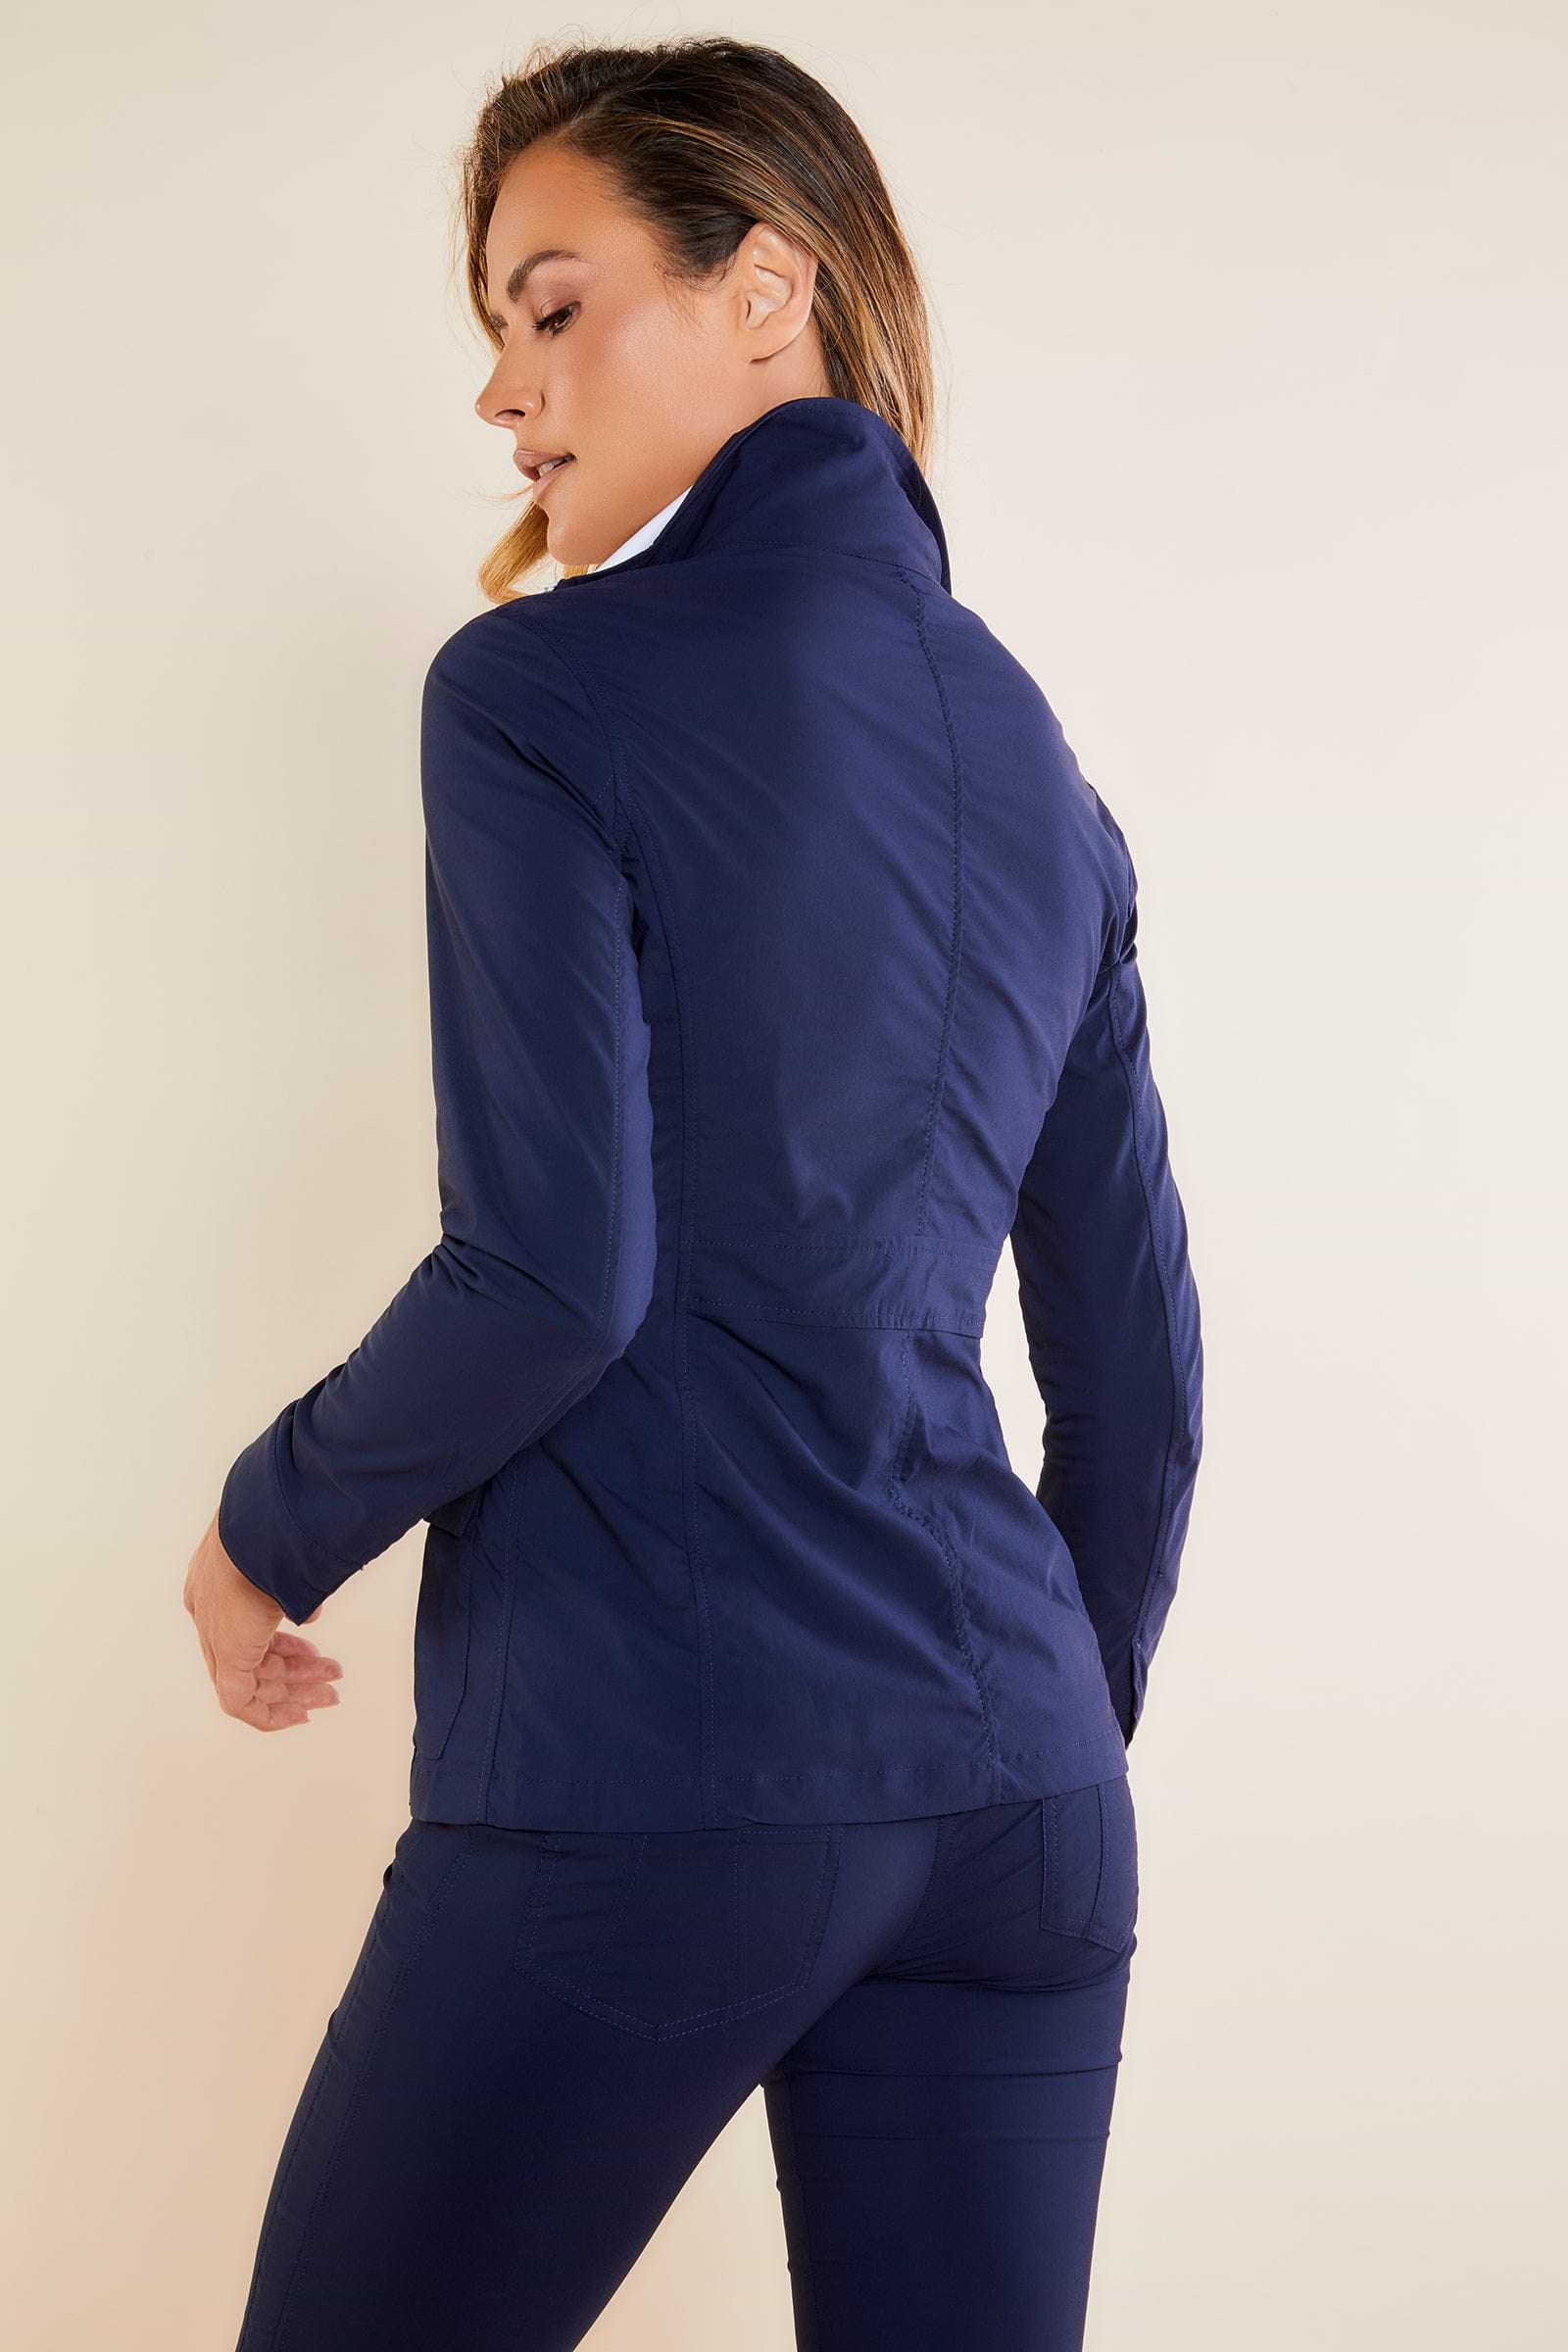 The Best Travel Safari Jacket. Woman Showing the Back Profile of a Safari Jacket in Navy